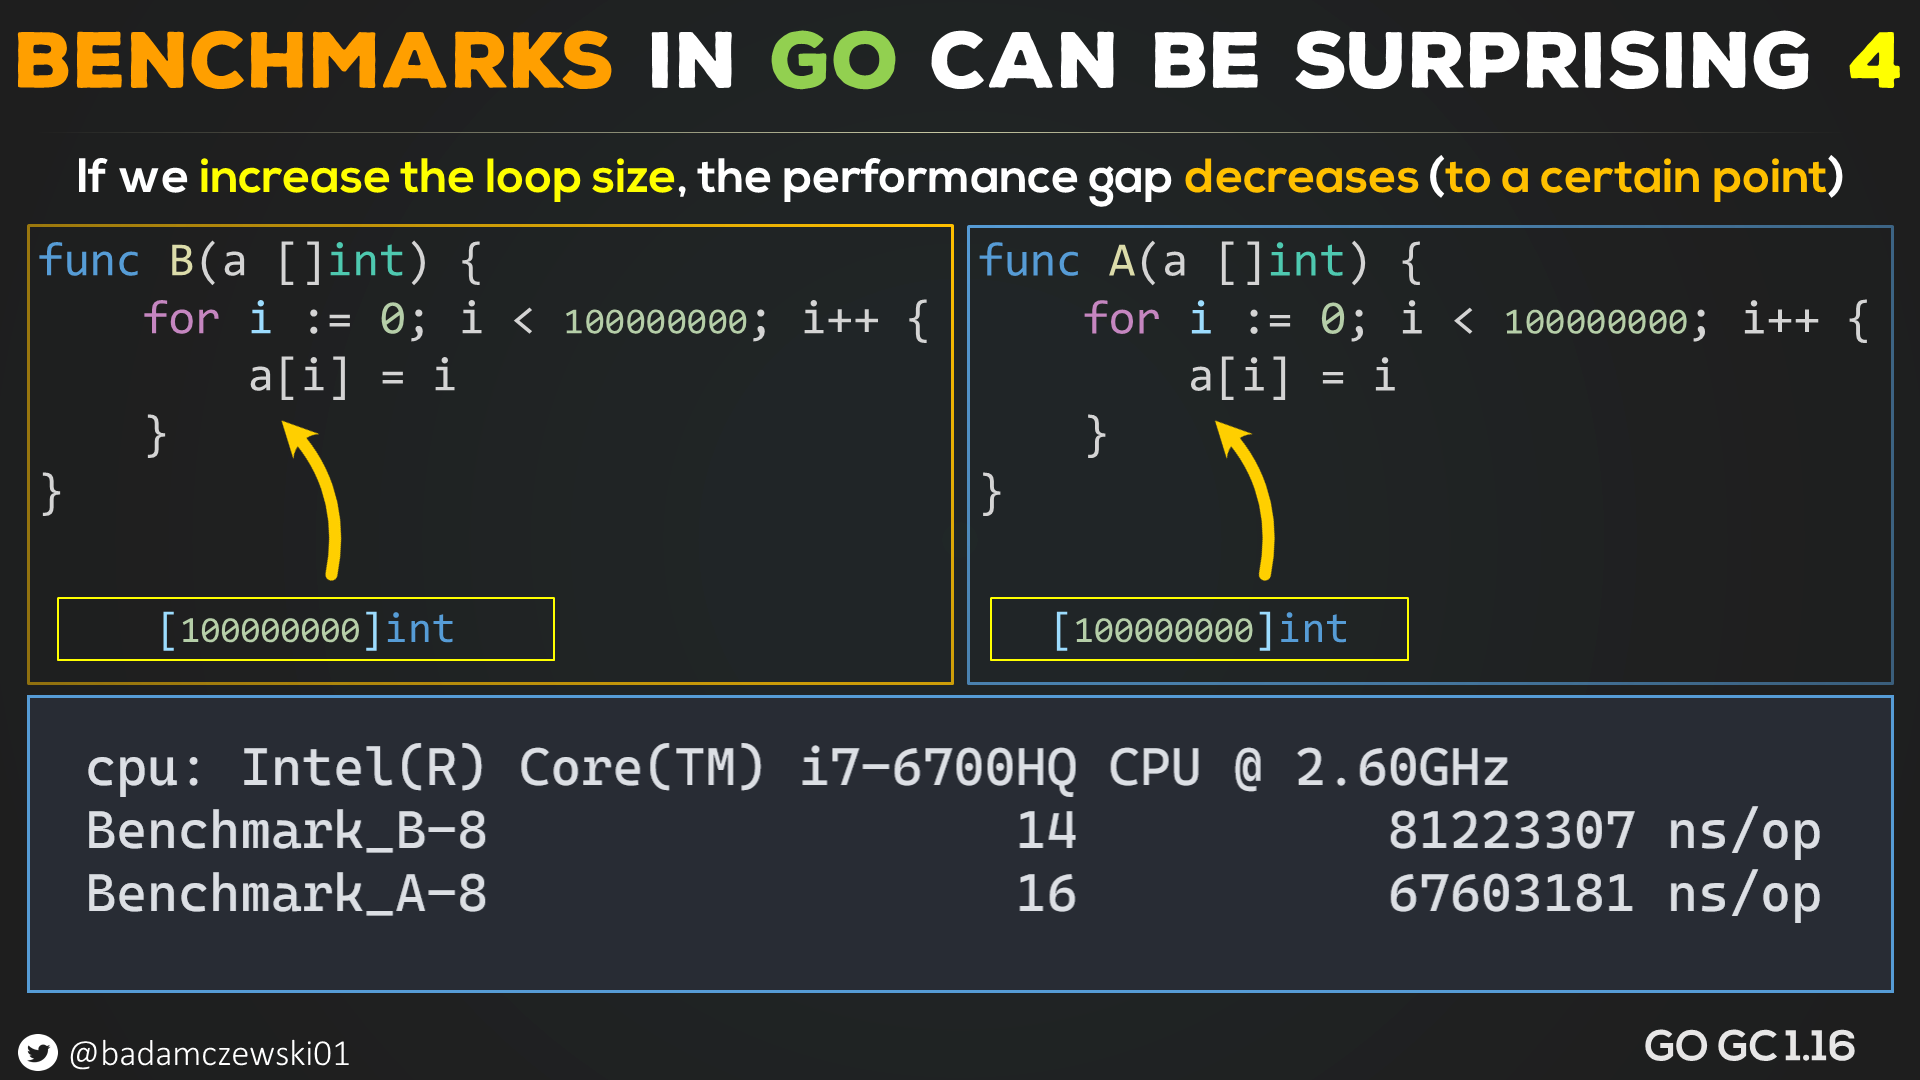 Benchmarks in GO can be surprising